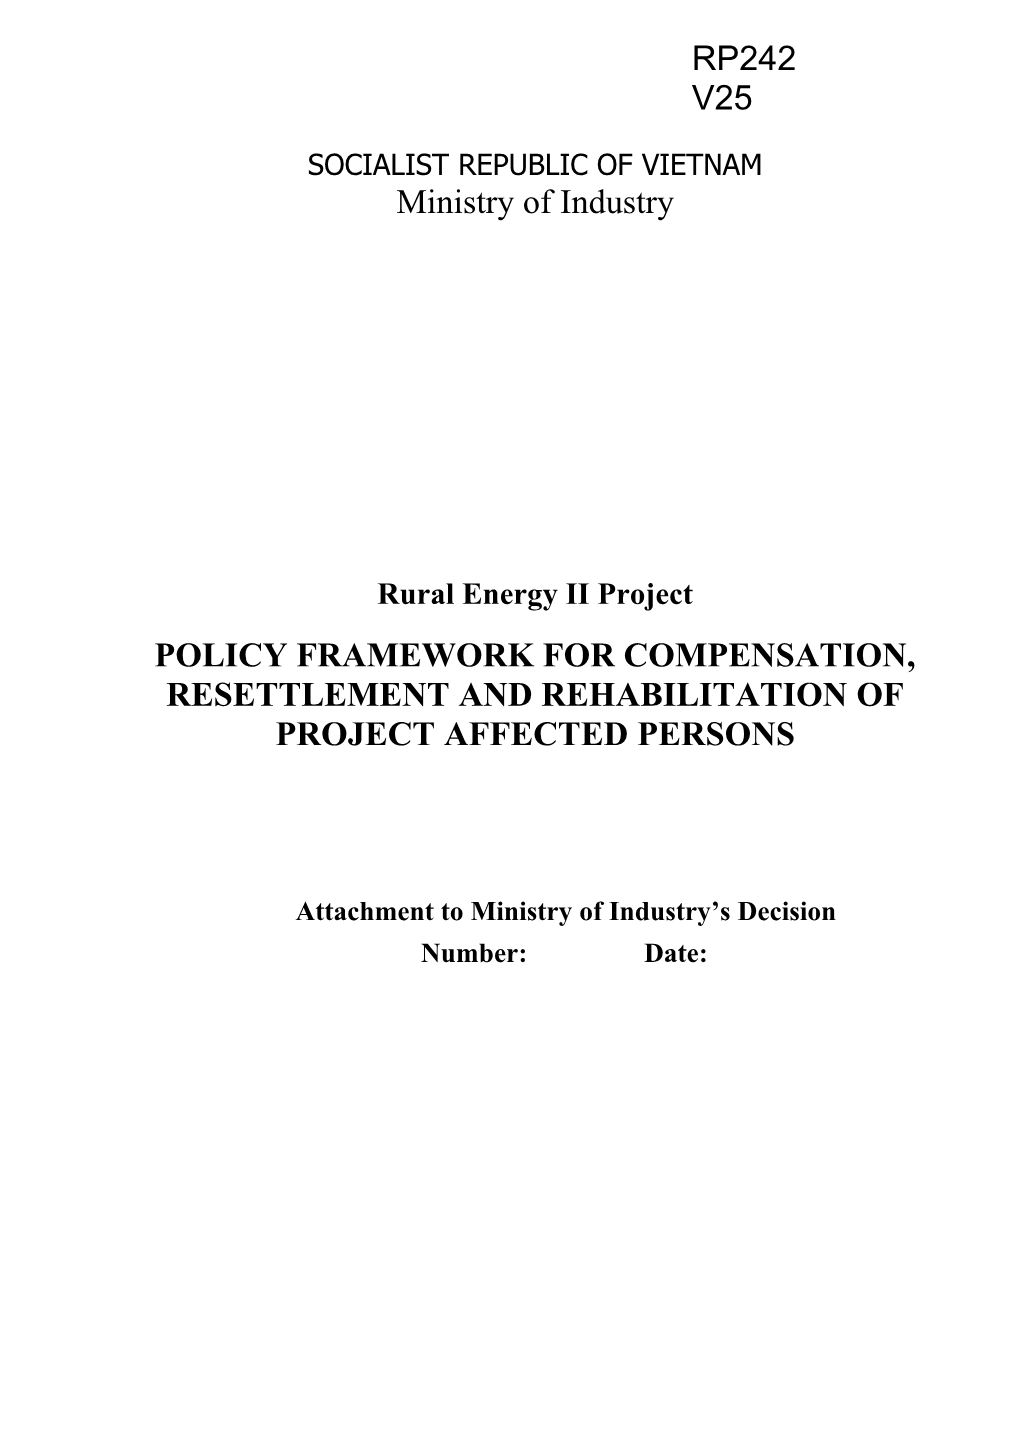 Policy Framework for Compensation, Resettlement and Rehabilitation of Project Affected Persons